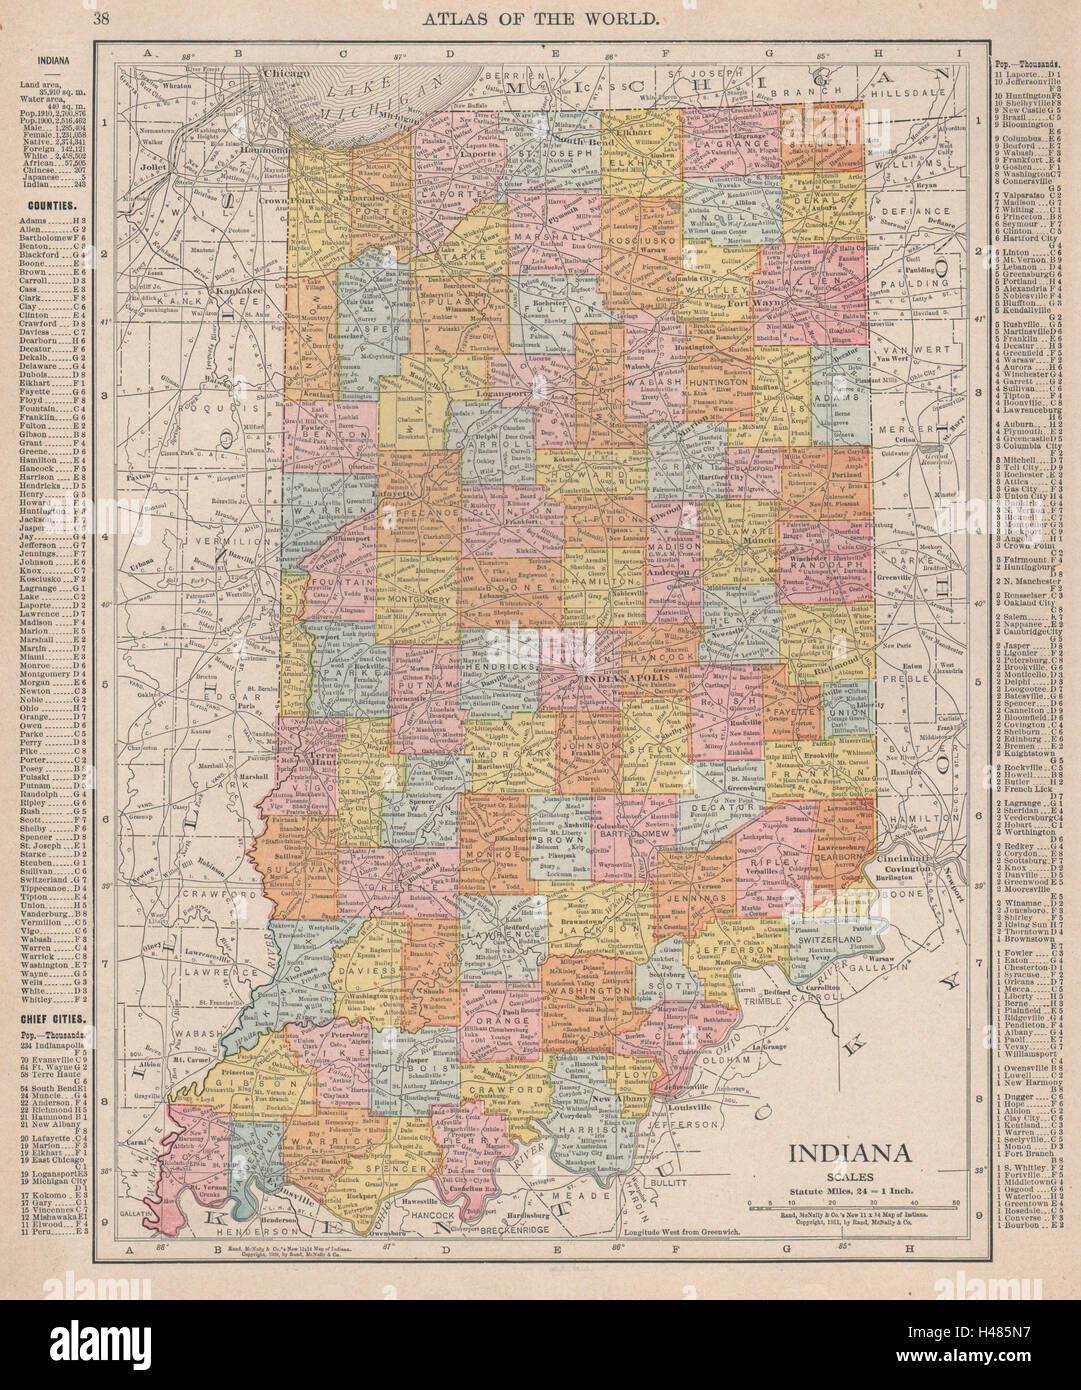 Indiana state map showing counties. RAND MCNALLY 1912 old antique chart Stock Photo